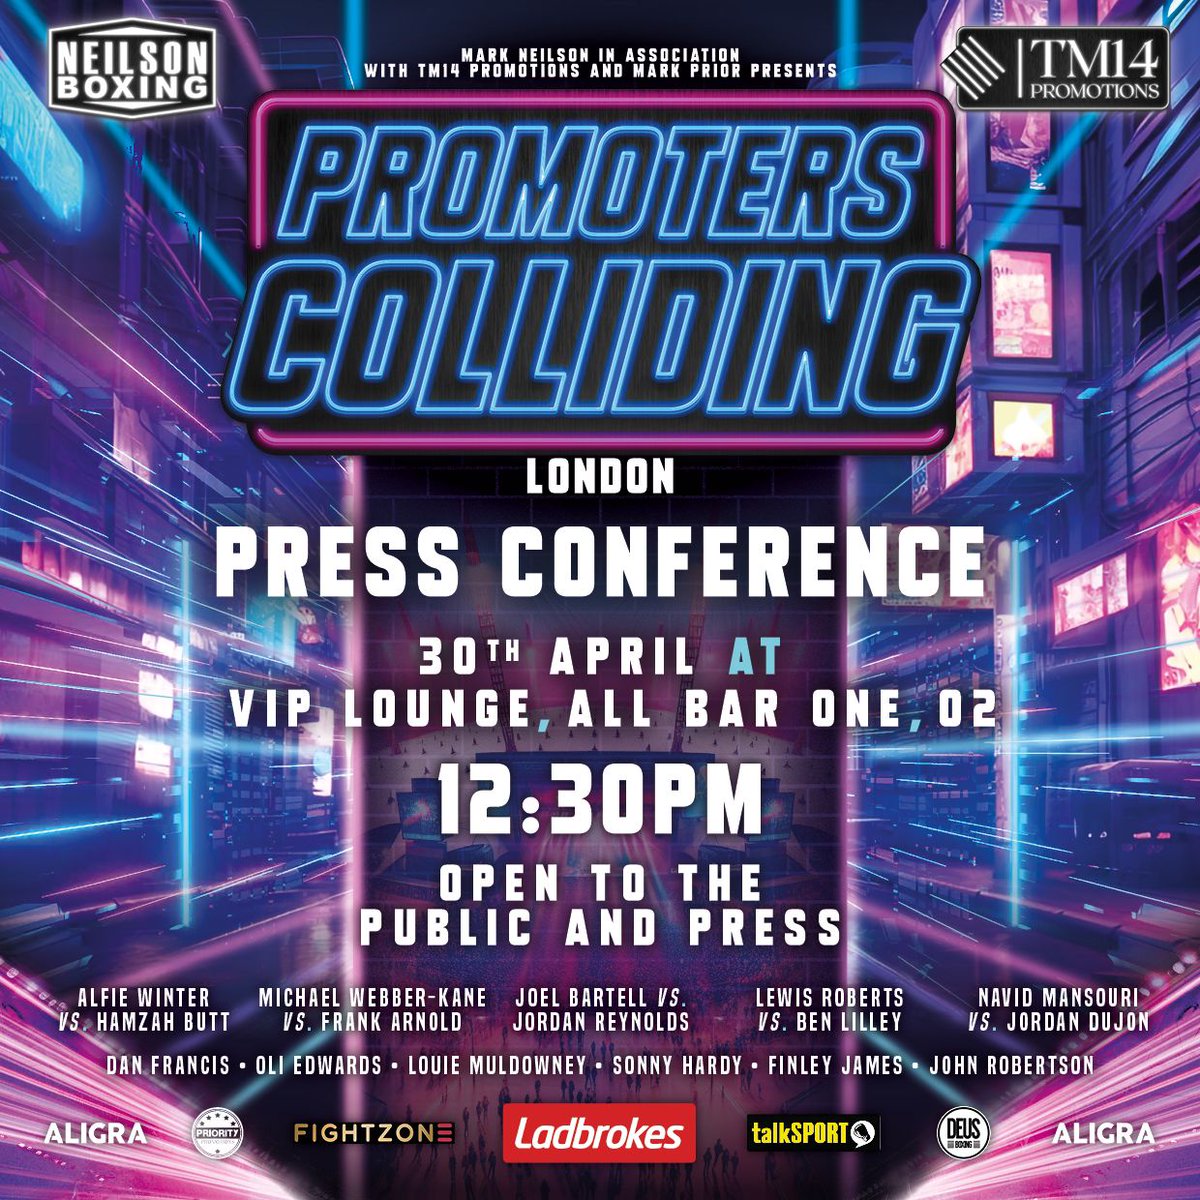 Huge press conference tomorrow for #PromotersColliding, it's gonna be fireworks 💥💥 All public, press and media welcome 12:30pm VIP Lounge - All Bar One, indigo at The O2 See you there 👊🏻 @NeilsonBoxing @tm14promotions_